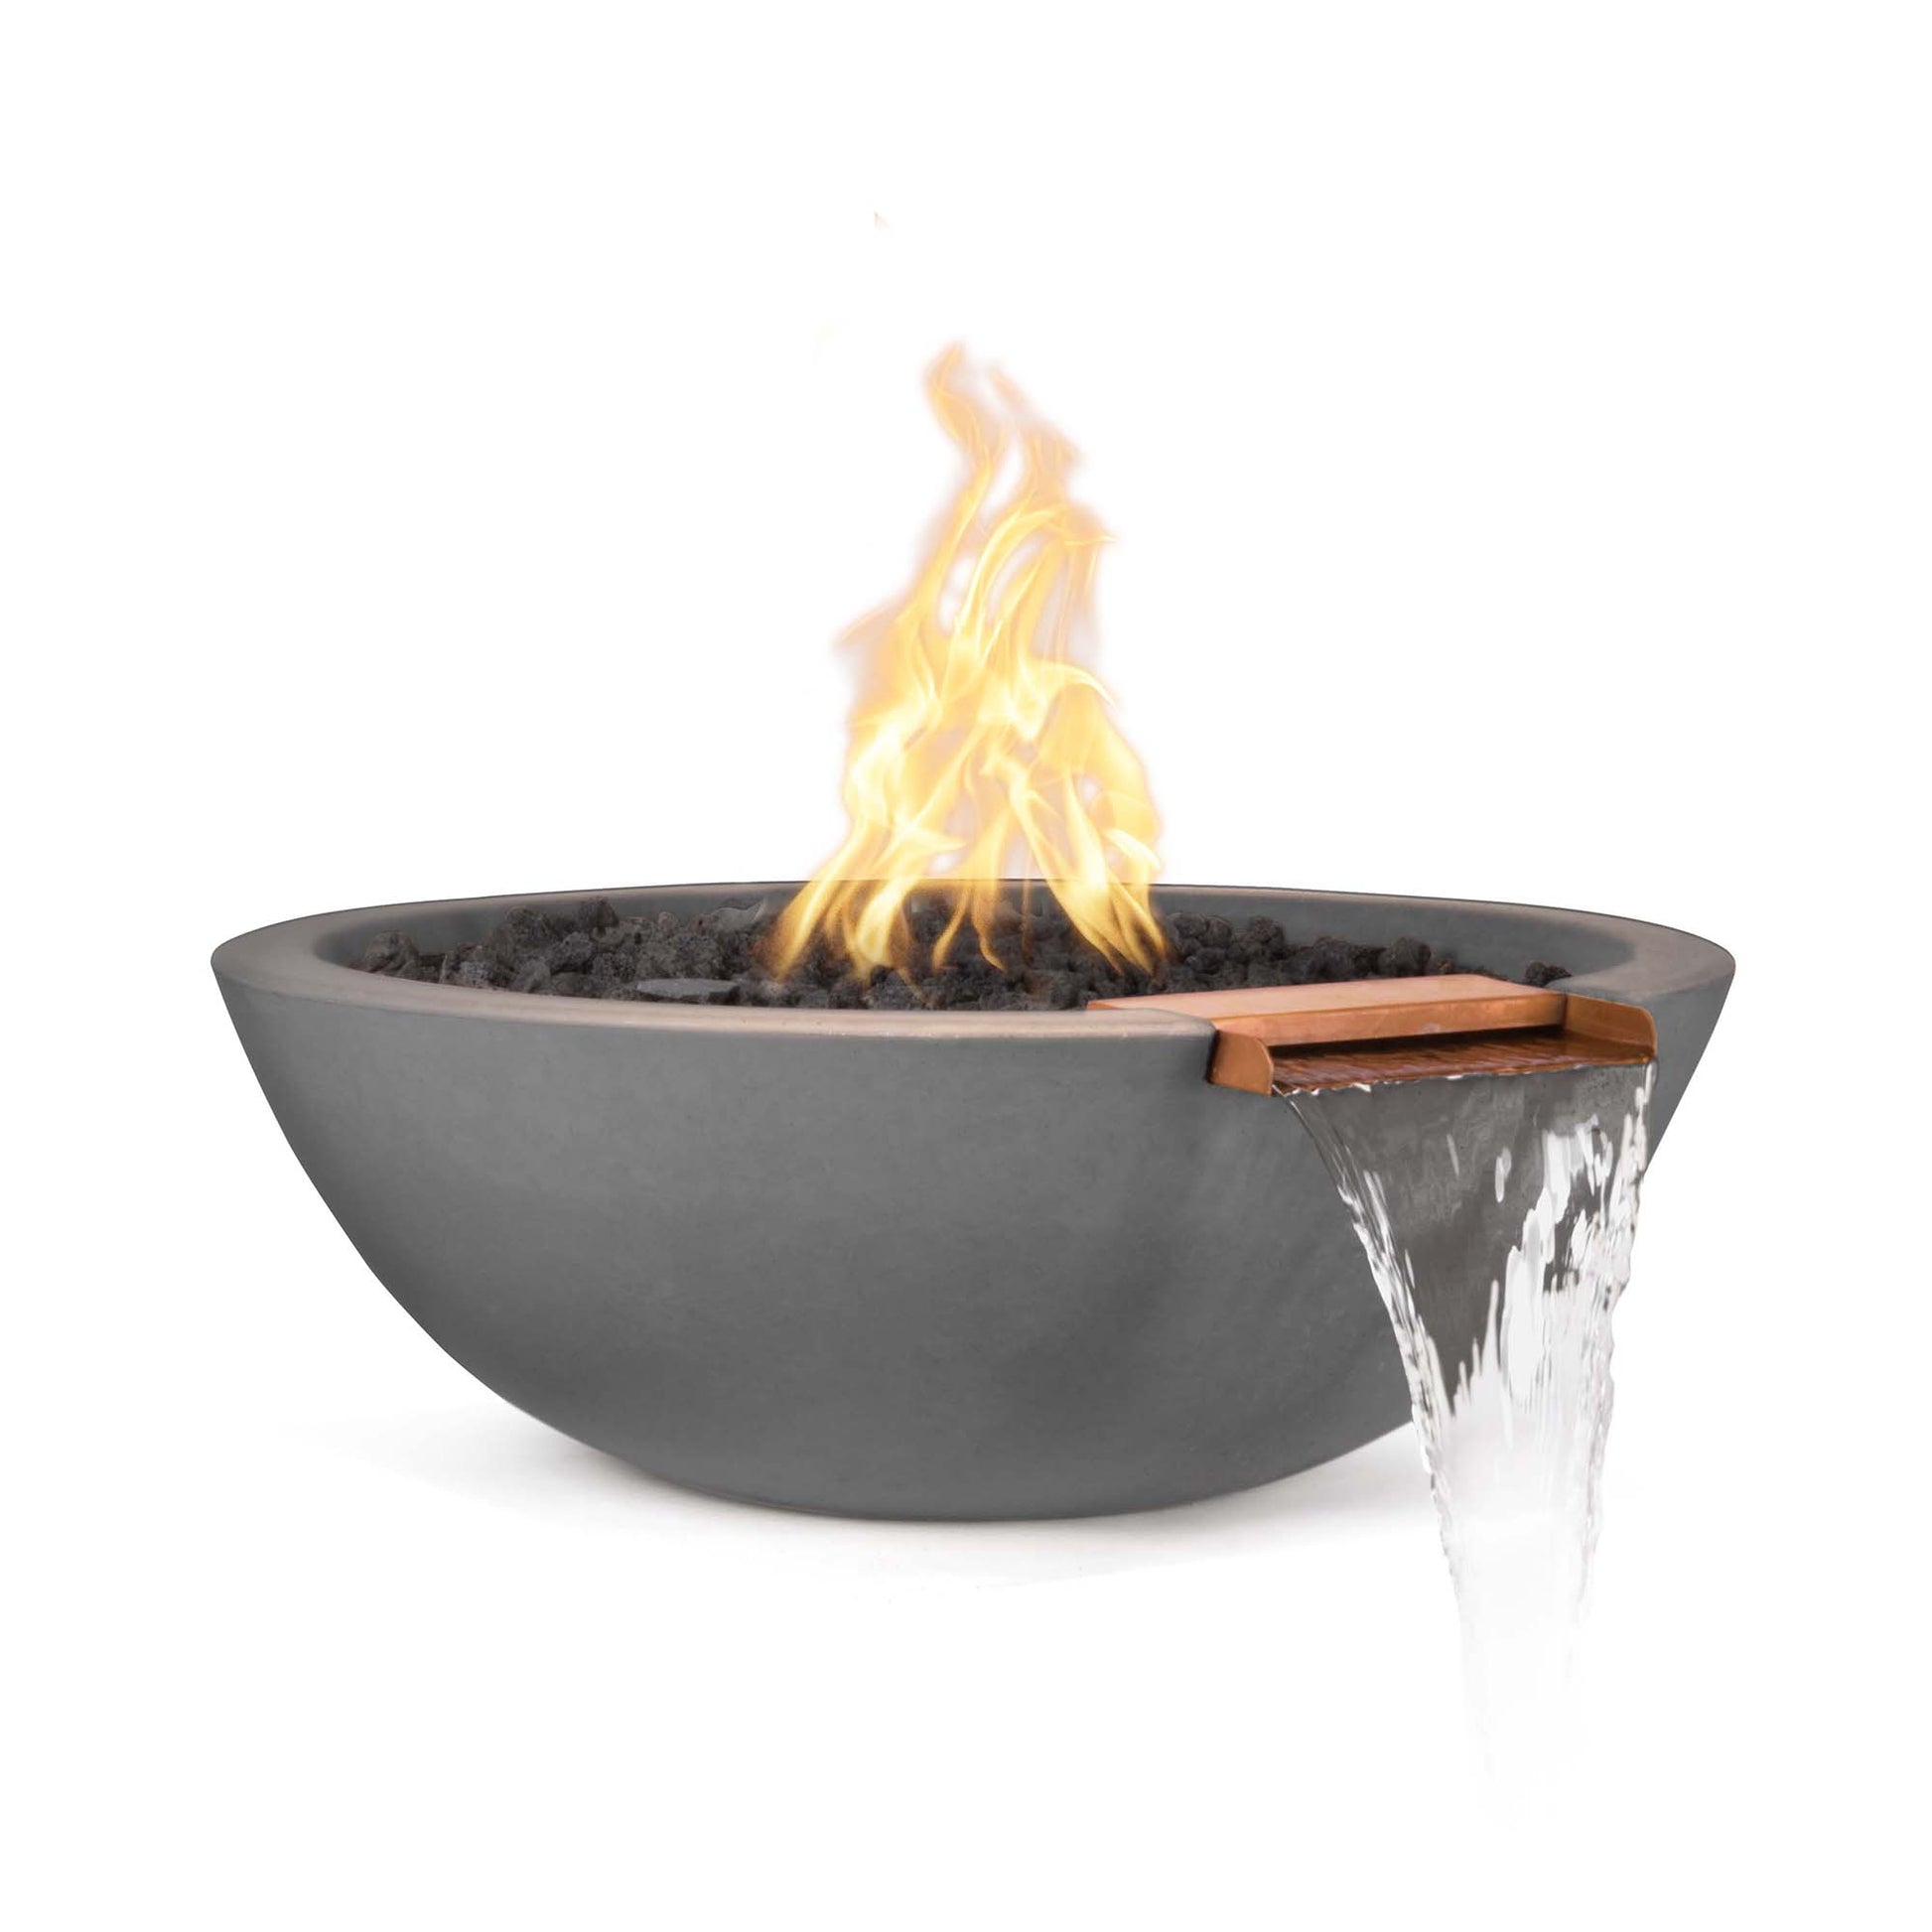 The Outdoor Plus Round Sedona 27" Brown GFRC Concrete Natural Gas Fire & Water Bowl with Match Lit with Flame Sense Ignition